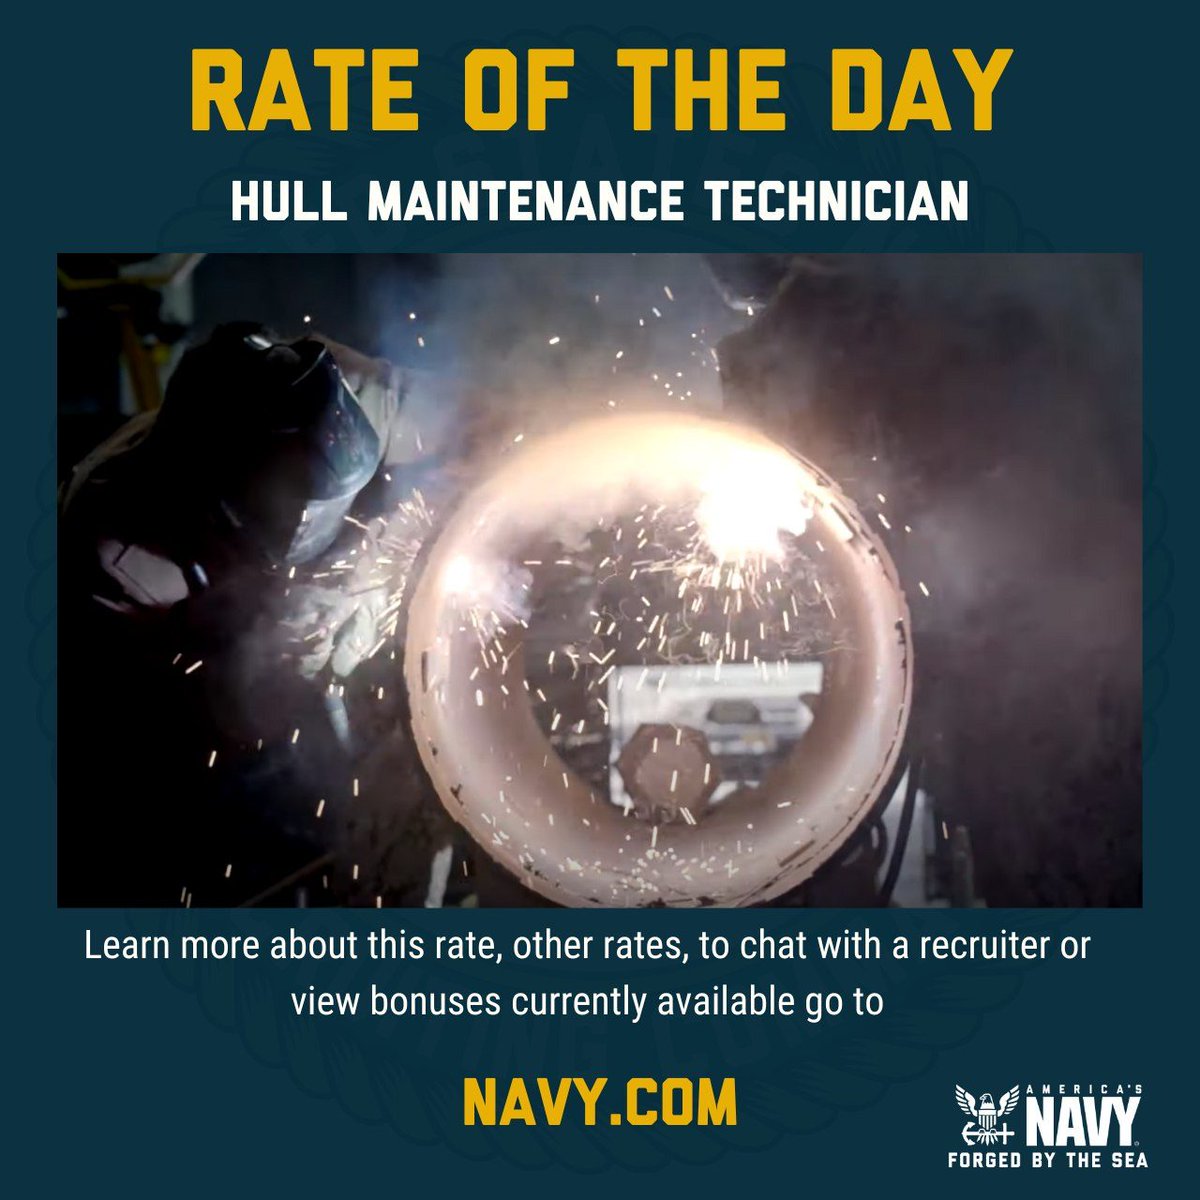 Rate of the Day: Hull Maintenance Technician Watch the video at: youtu.be/FQ9KGeuSbxk Learn more at: navy.com/careers/hull-m… #USNavy #Recruiting #Forgedbythesea